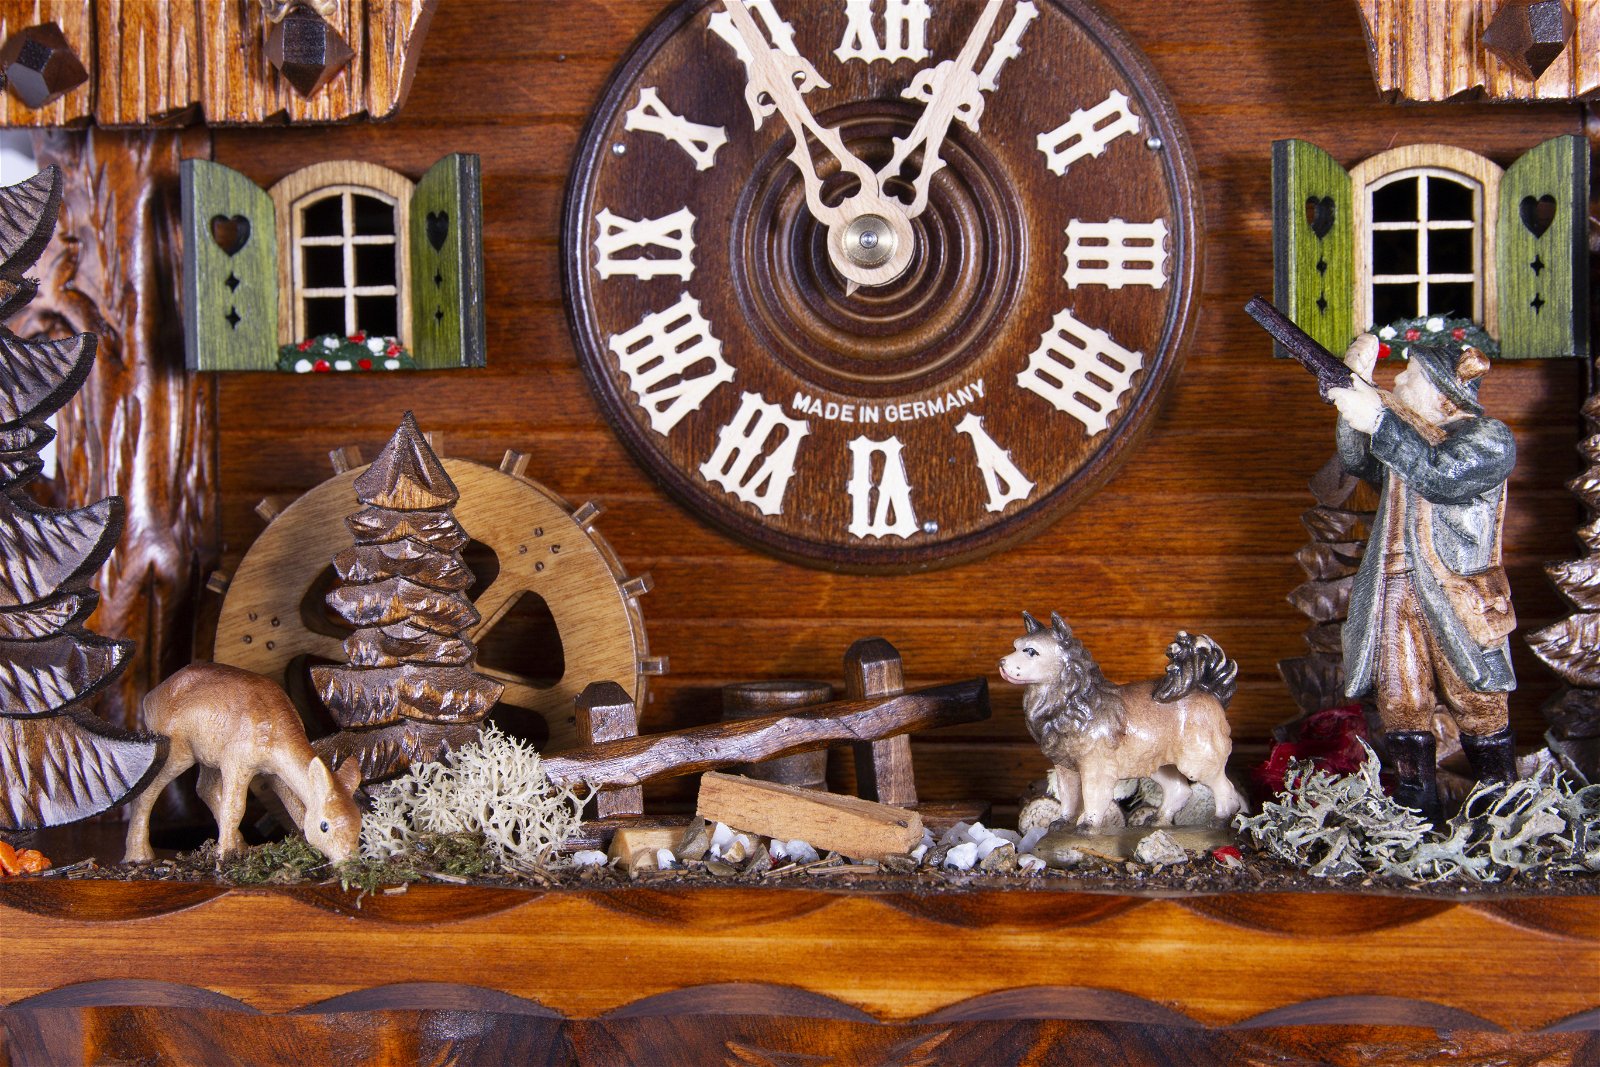 Cuckoo Clock 8-day-movement Chalet-Style 40cm by August Schwer